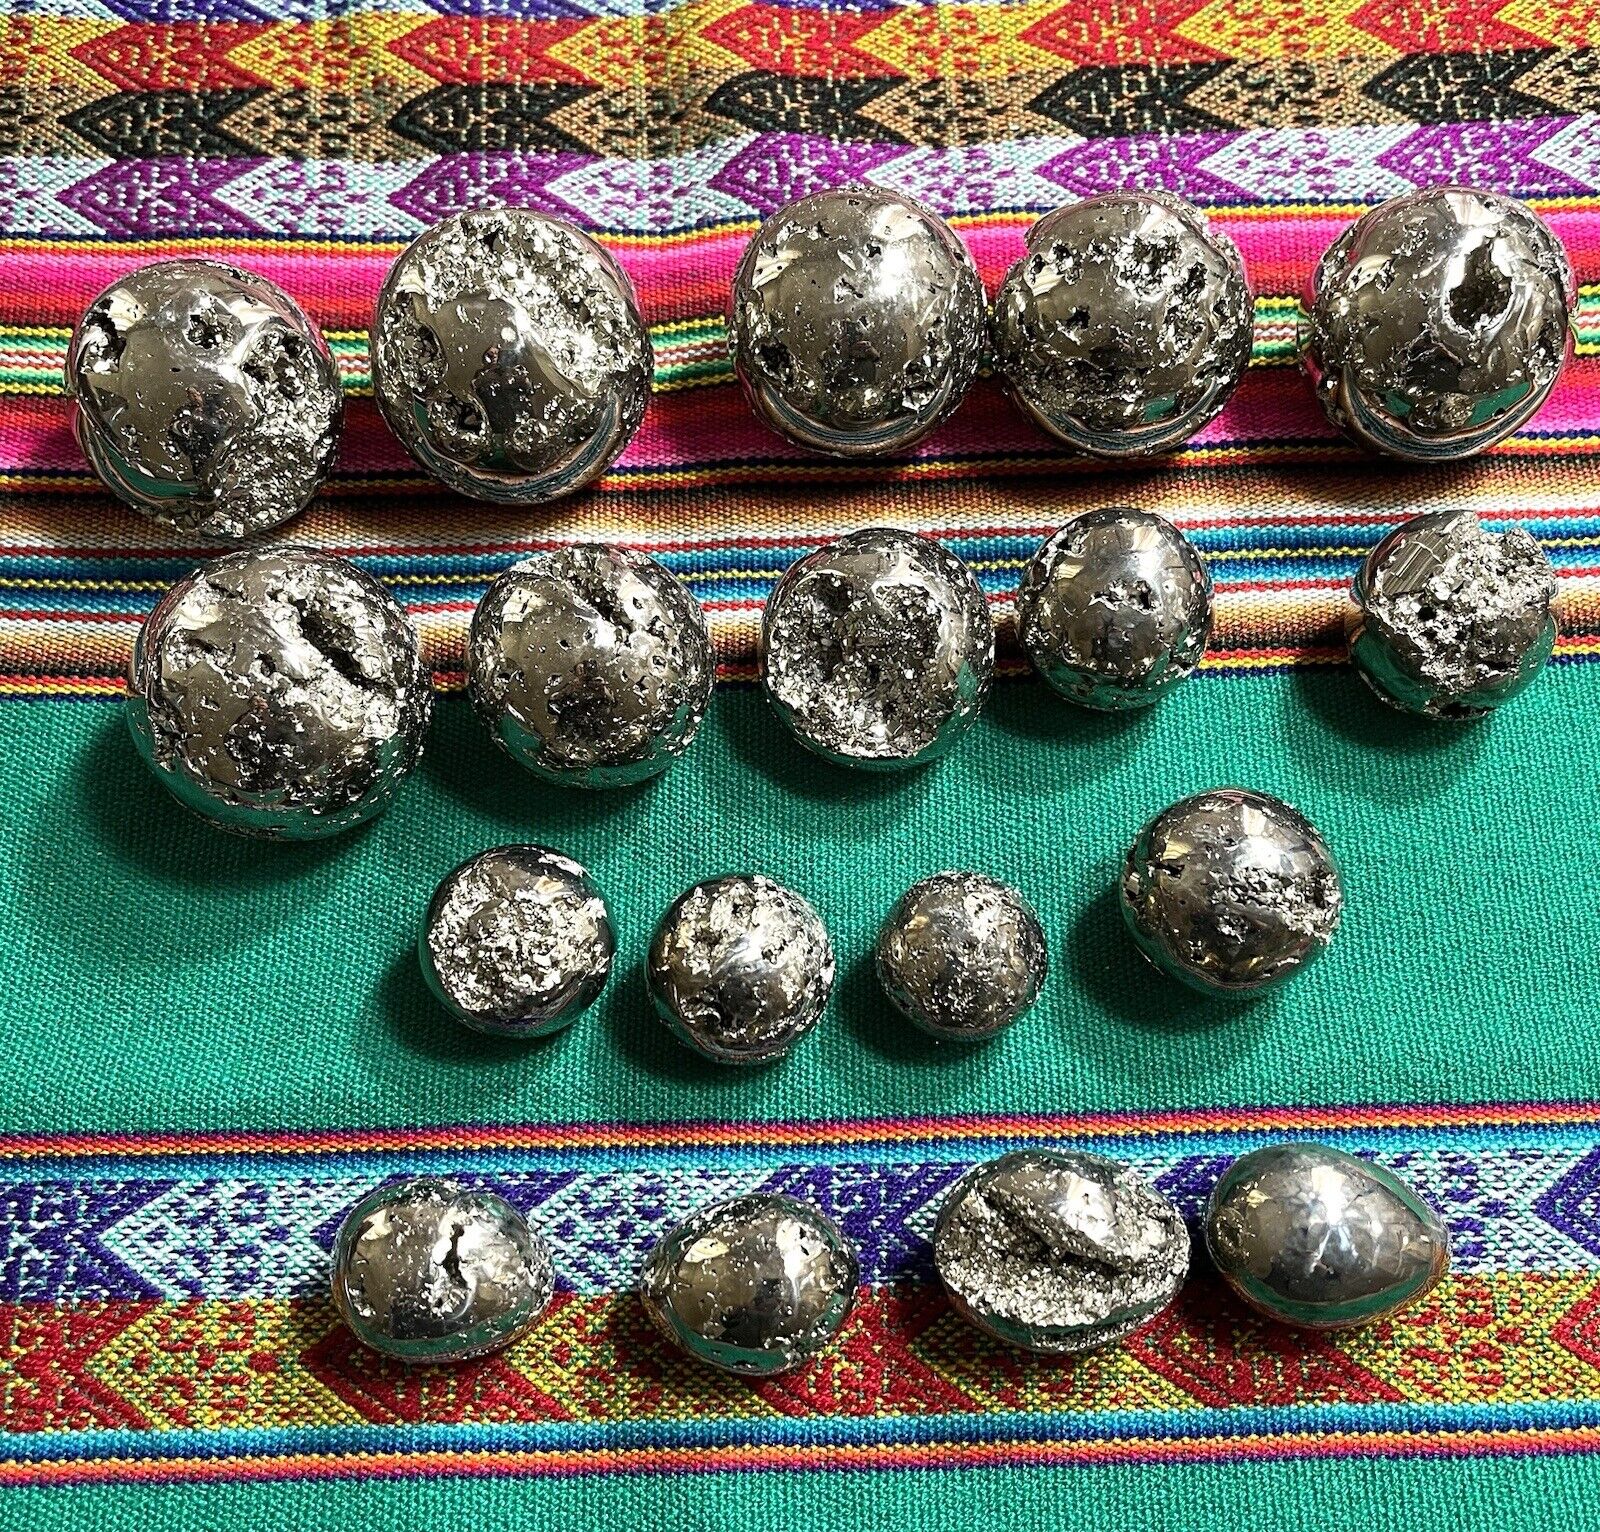 18  Pieces Pyrite Sphere Semiprecious Stone From Peru Spheres And Eggs. 5 Pounds